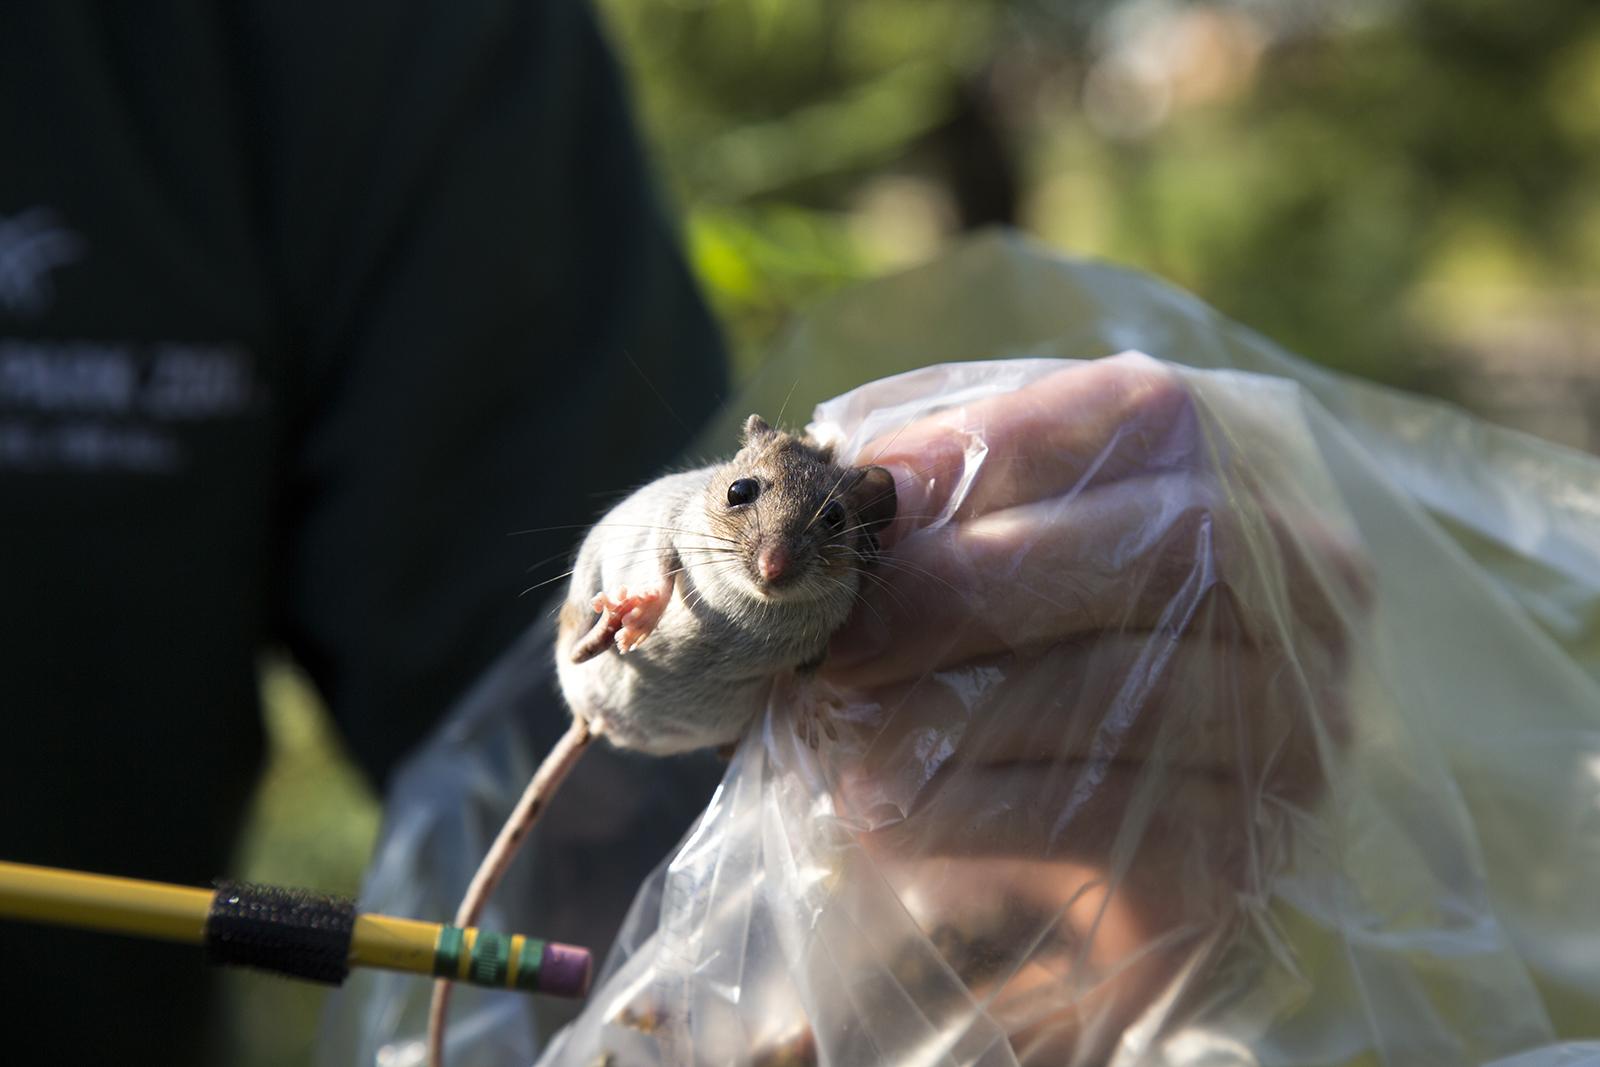 An ongoing Lincoln Park Zoo study aims to examine how communities of of mice and other small mammals fare in Chicago compared to its suburbs. (Jillian Braun / Lincoln Park Zoo)